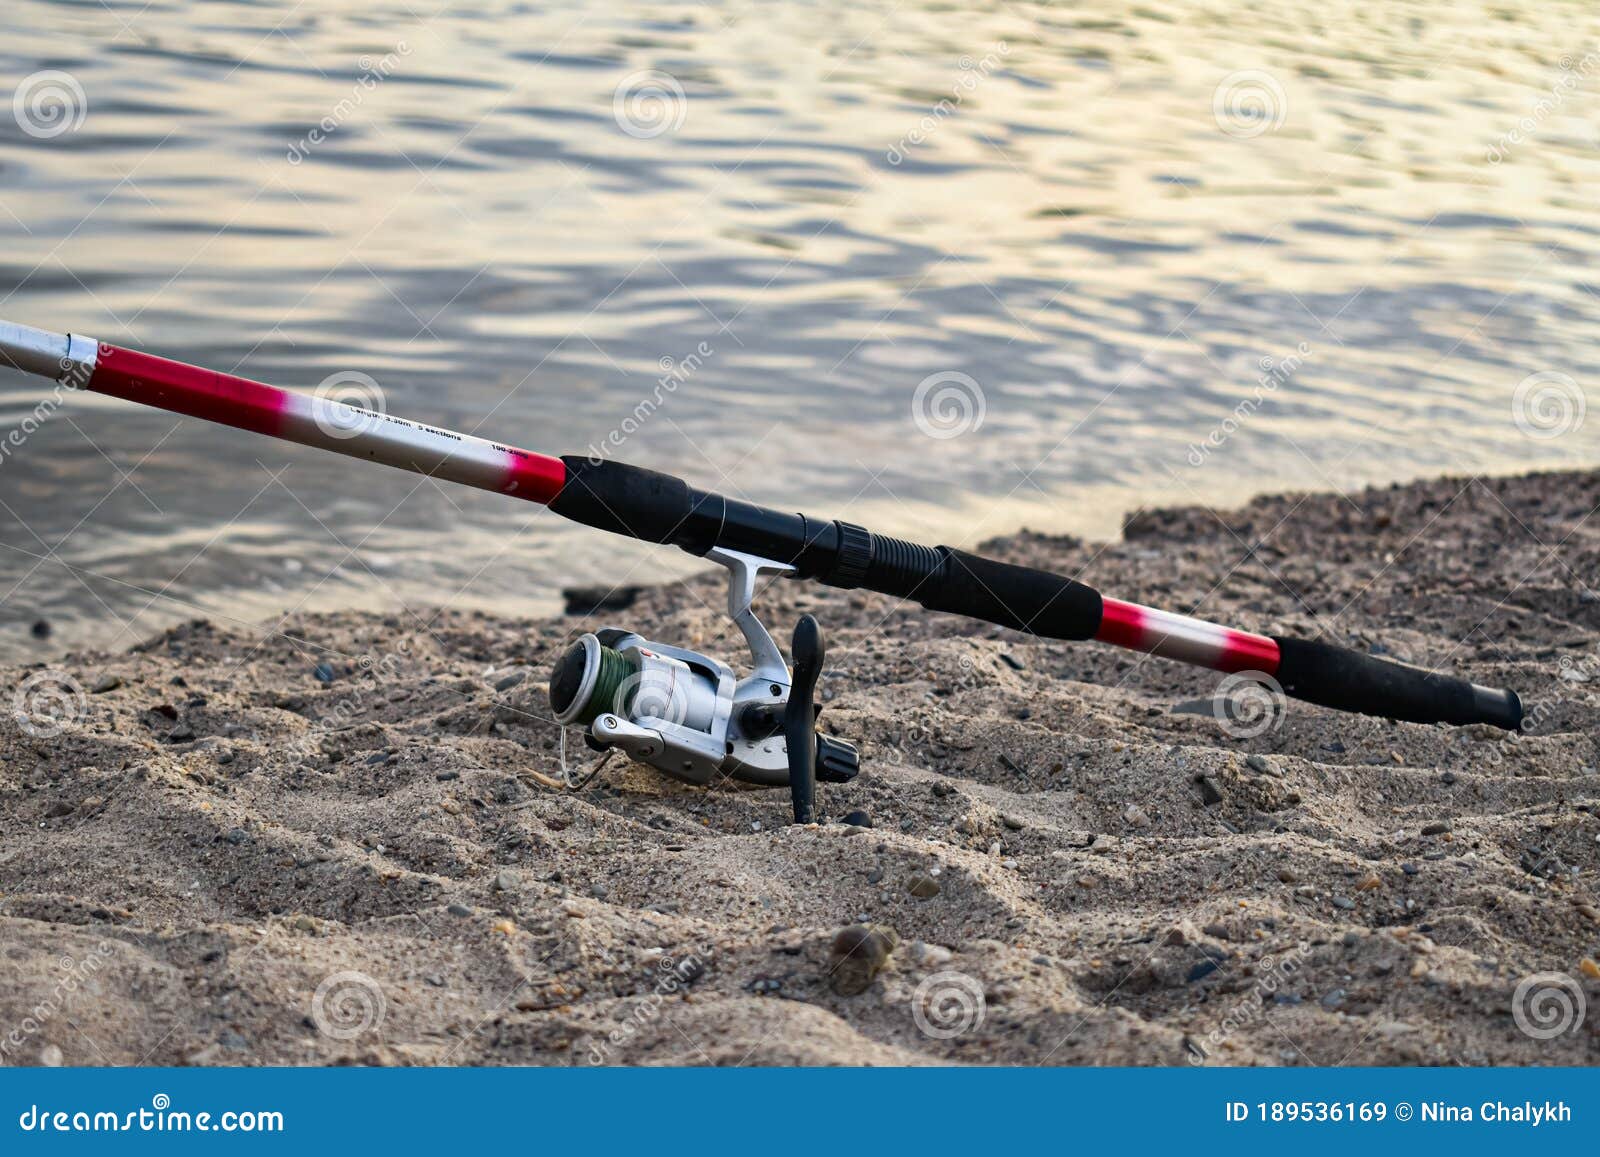 Fishing Tackle: Red-black Fishing Rod with a Reel on the Sandy Shore. Stock  Image - Image of leisure, equipment: 189536169